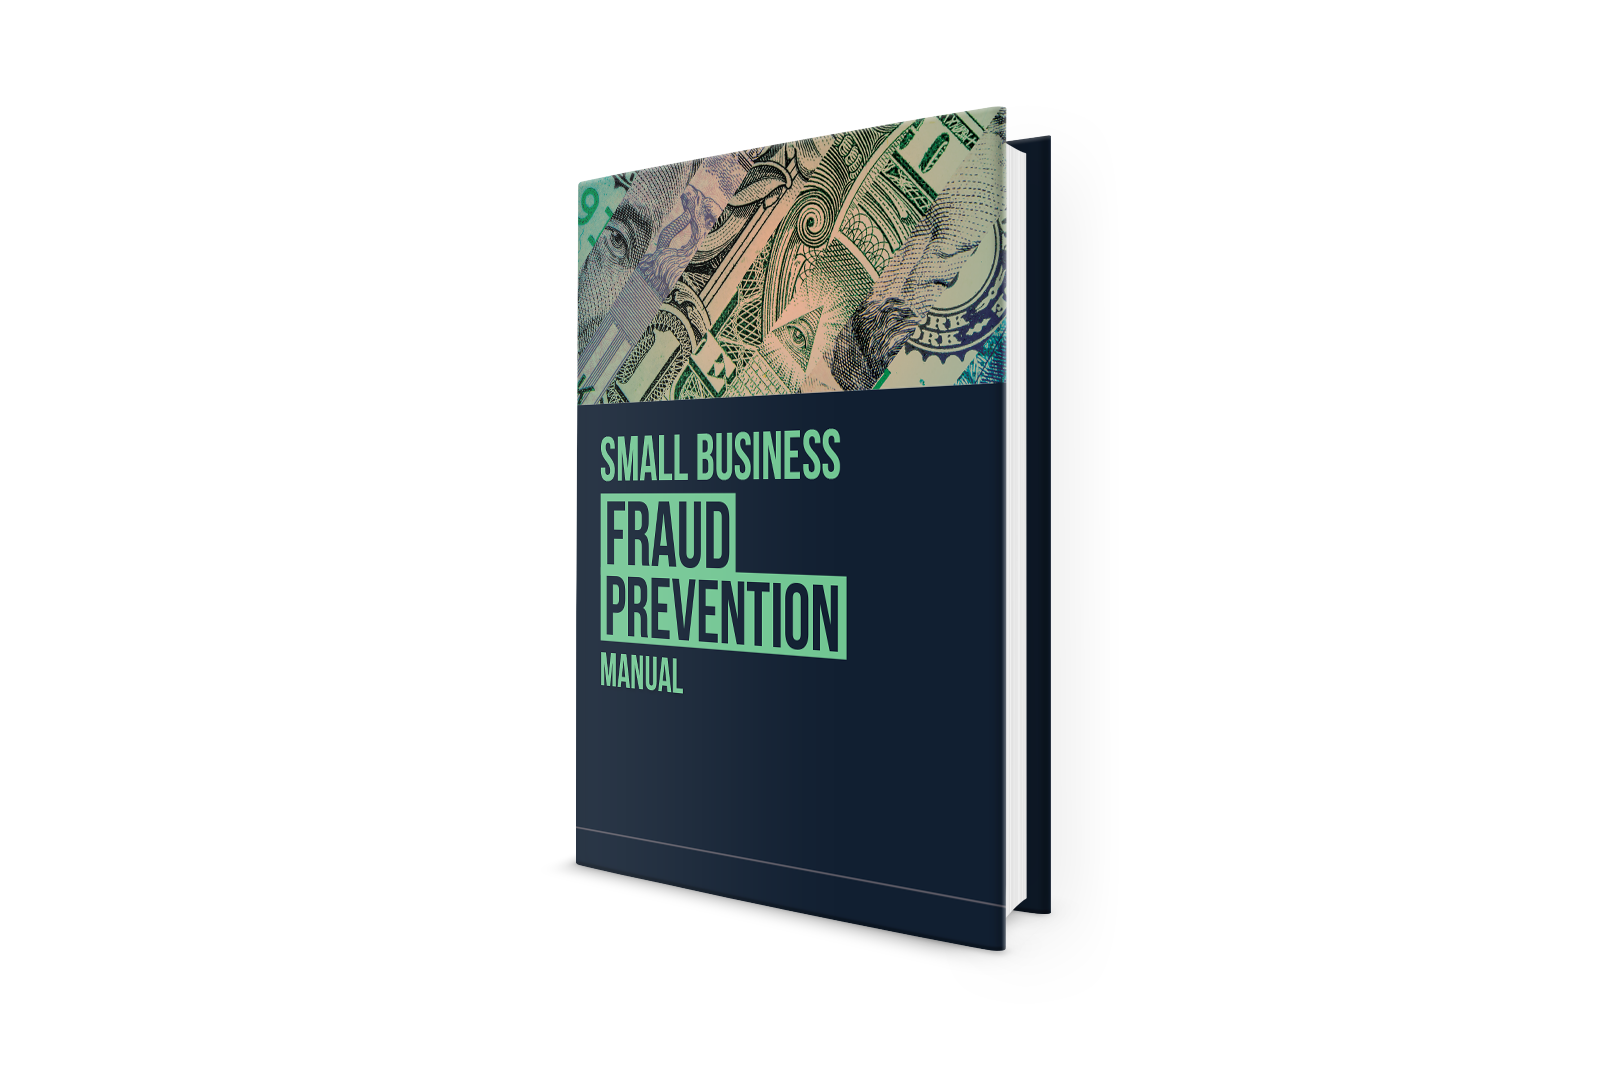 Small Business Fraud Prevention Manual